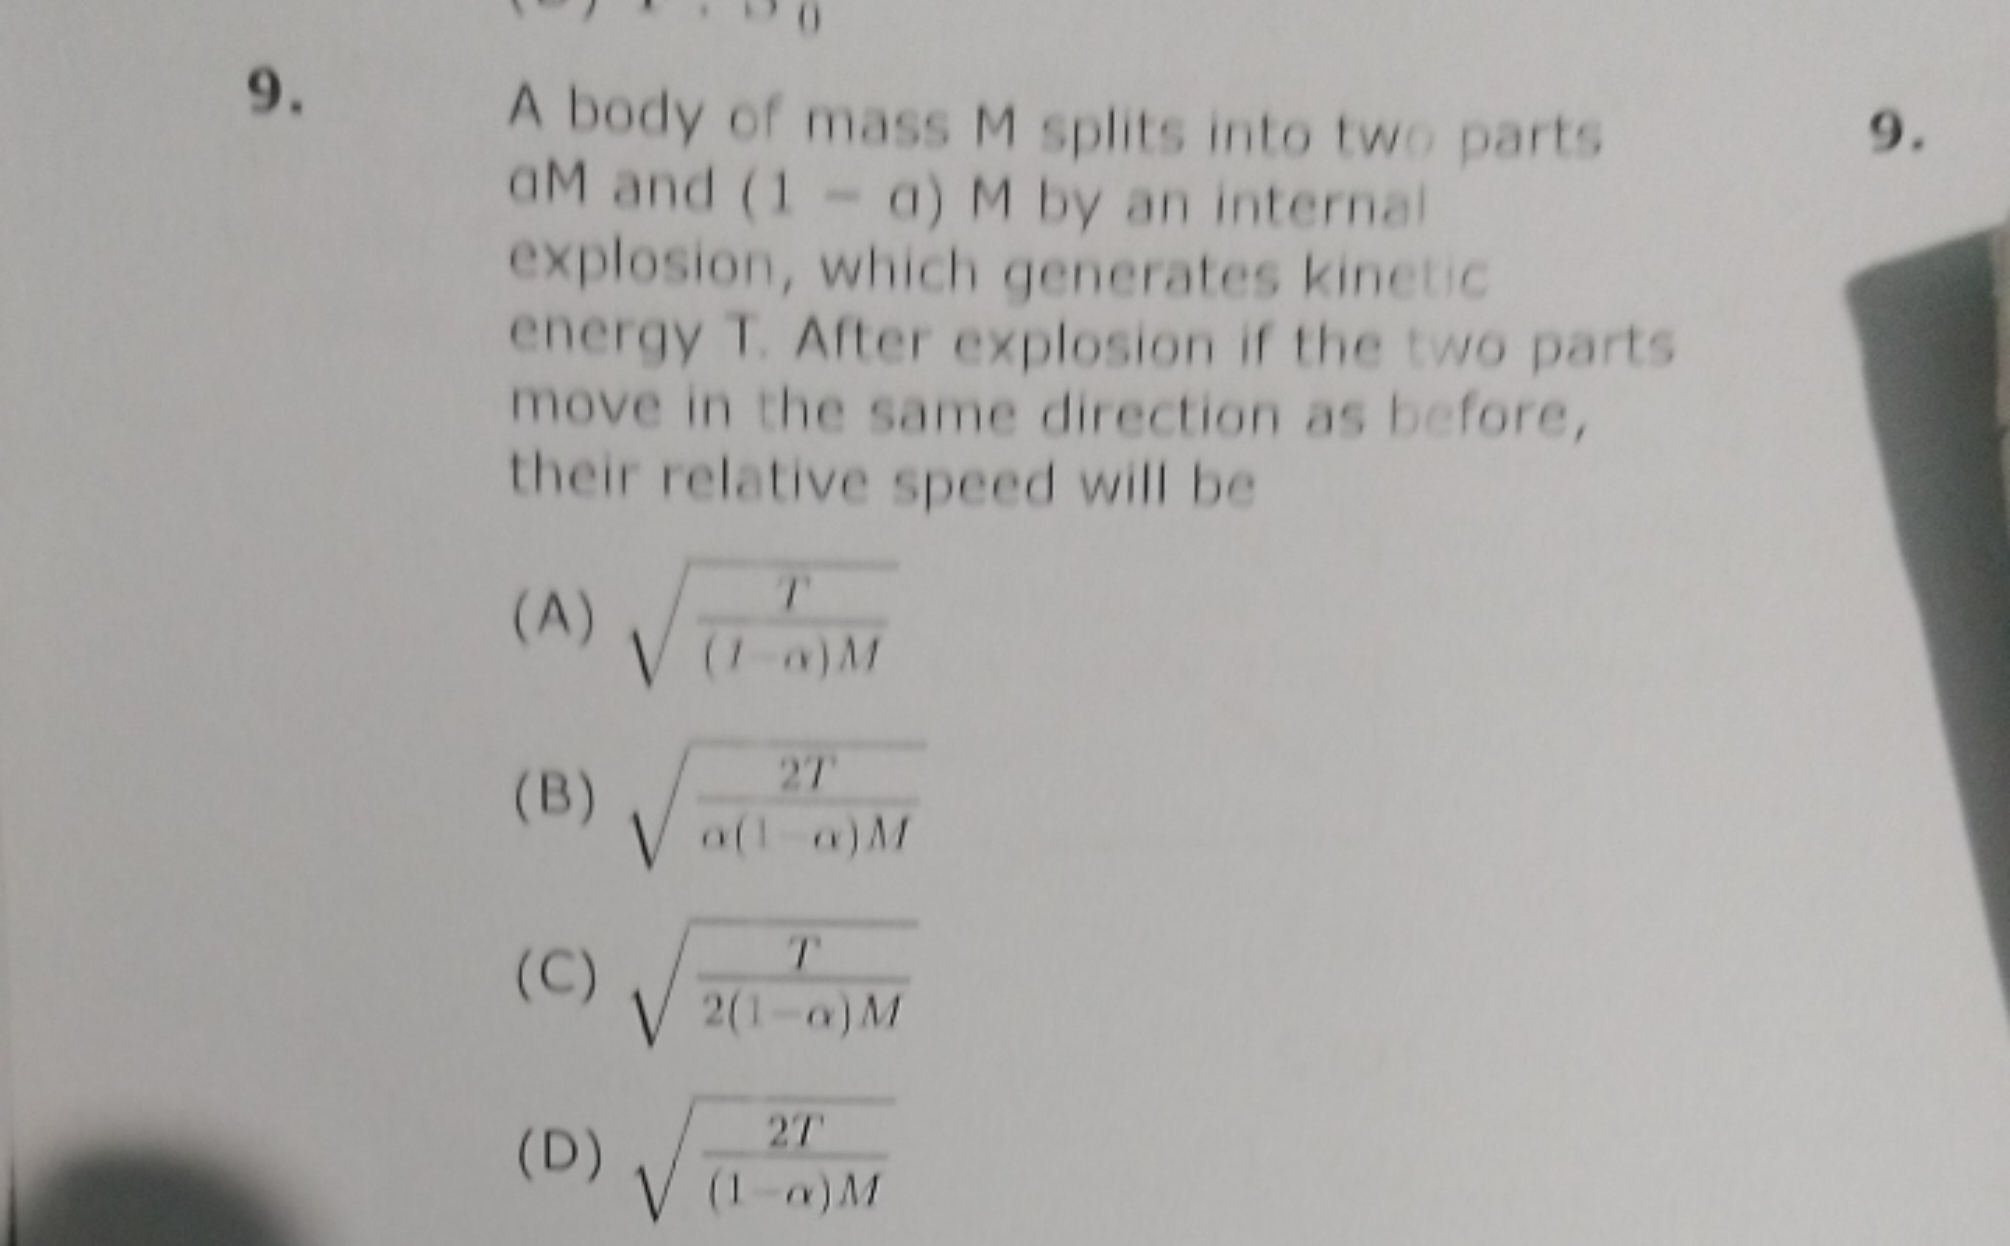 A body of mass M splits into two parts GM and (1−a)M by an internal ex